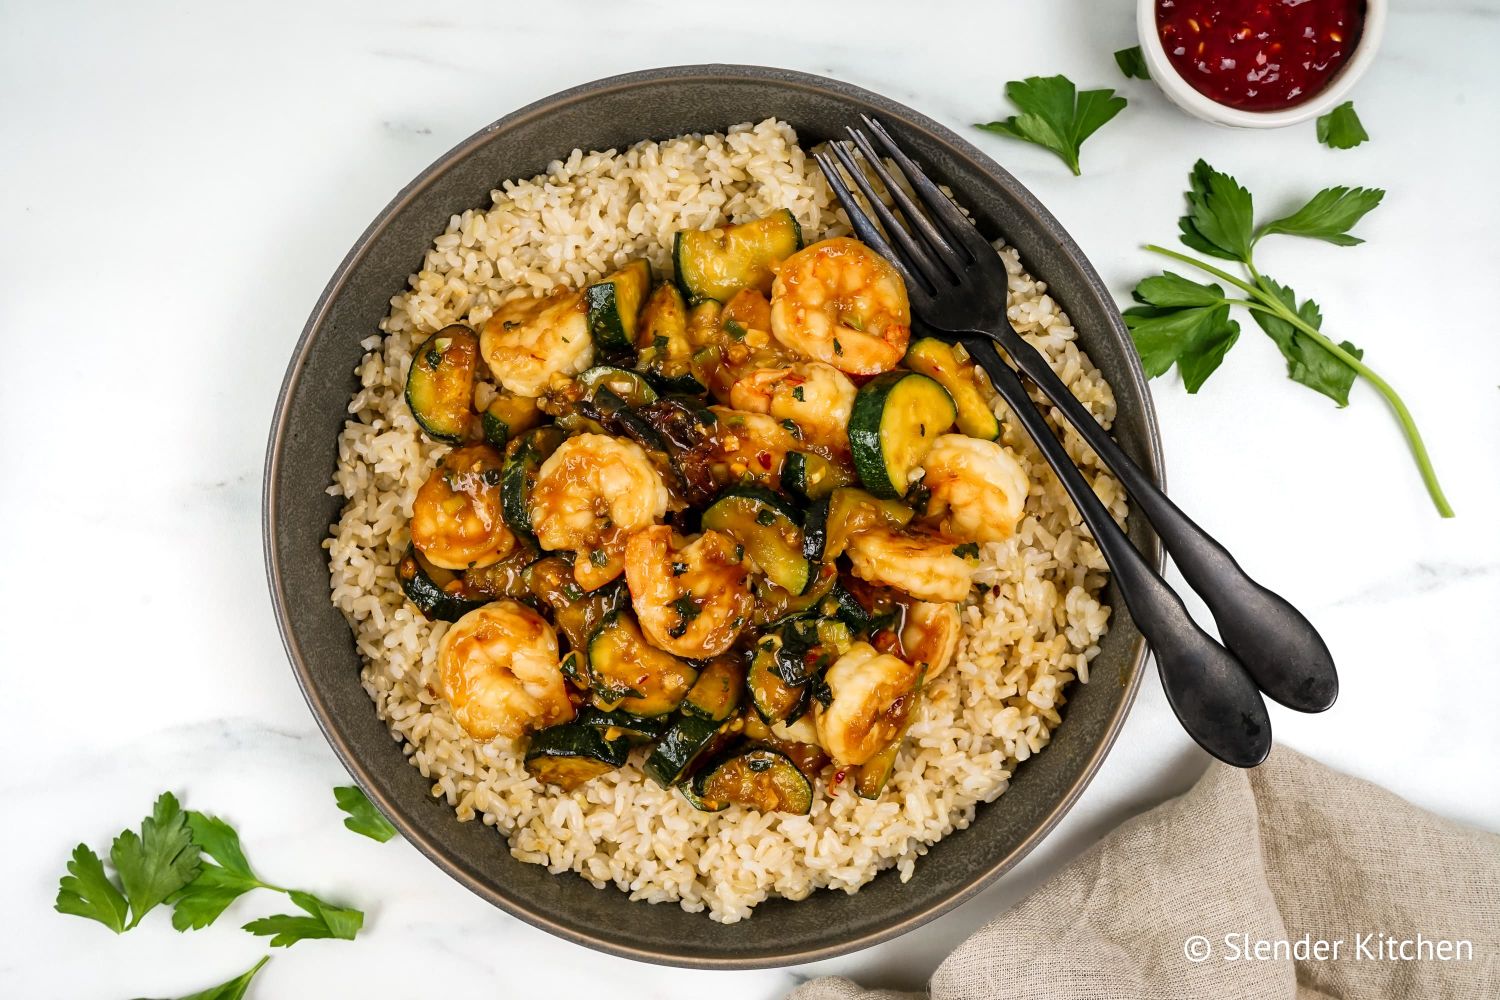 Stir fried shrimp with basil on a bed of brown rice.